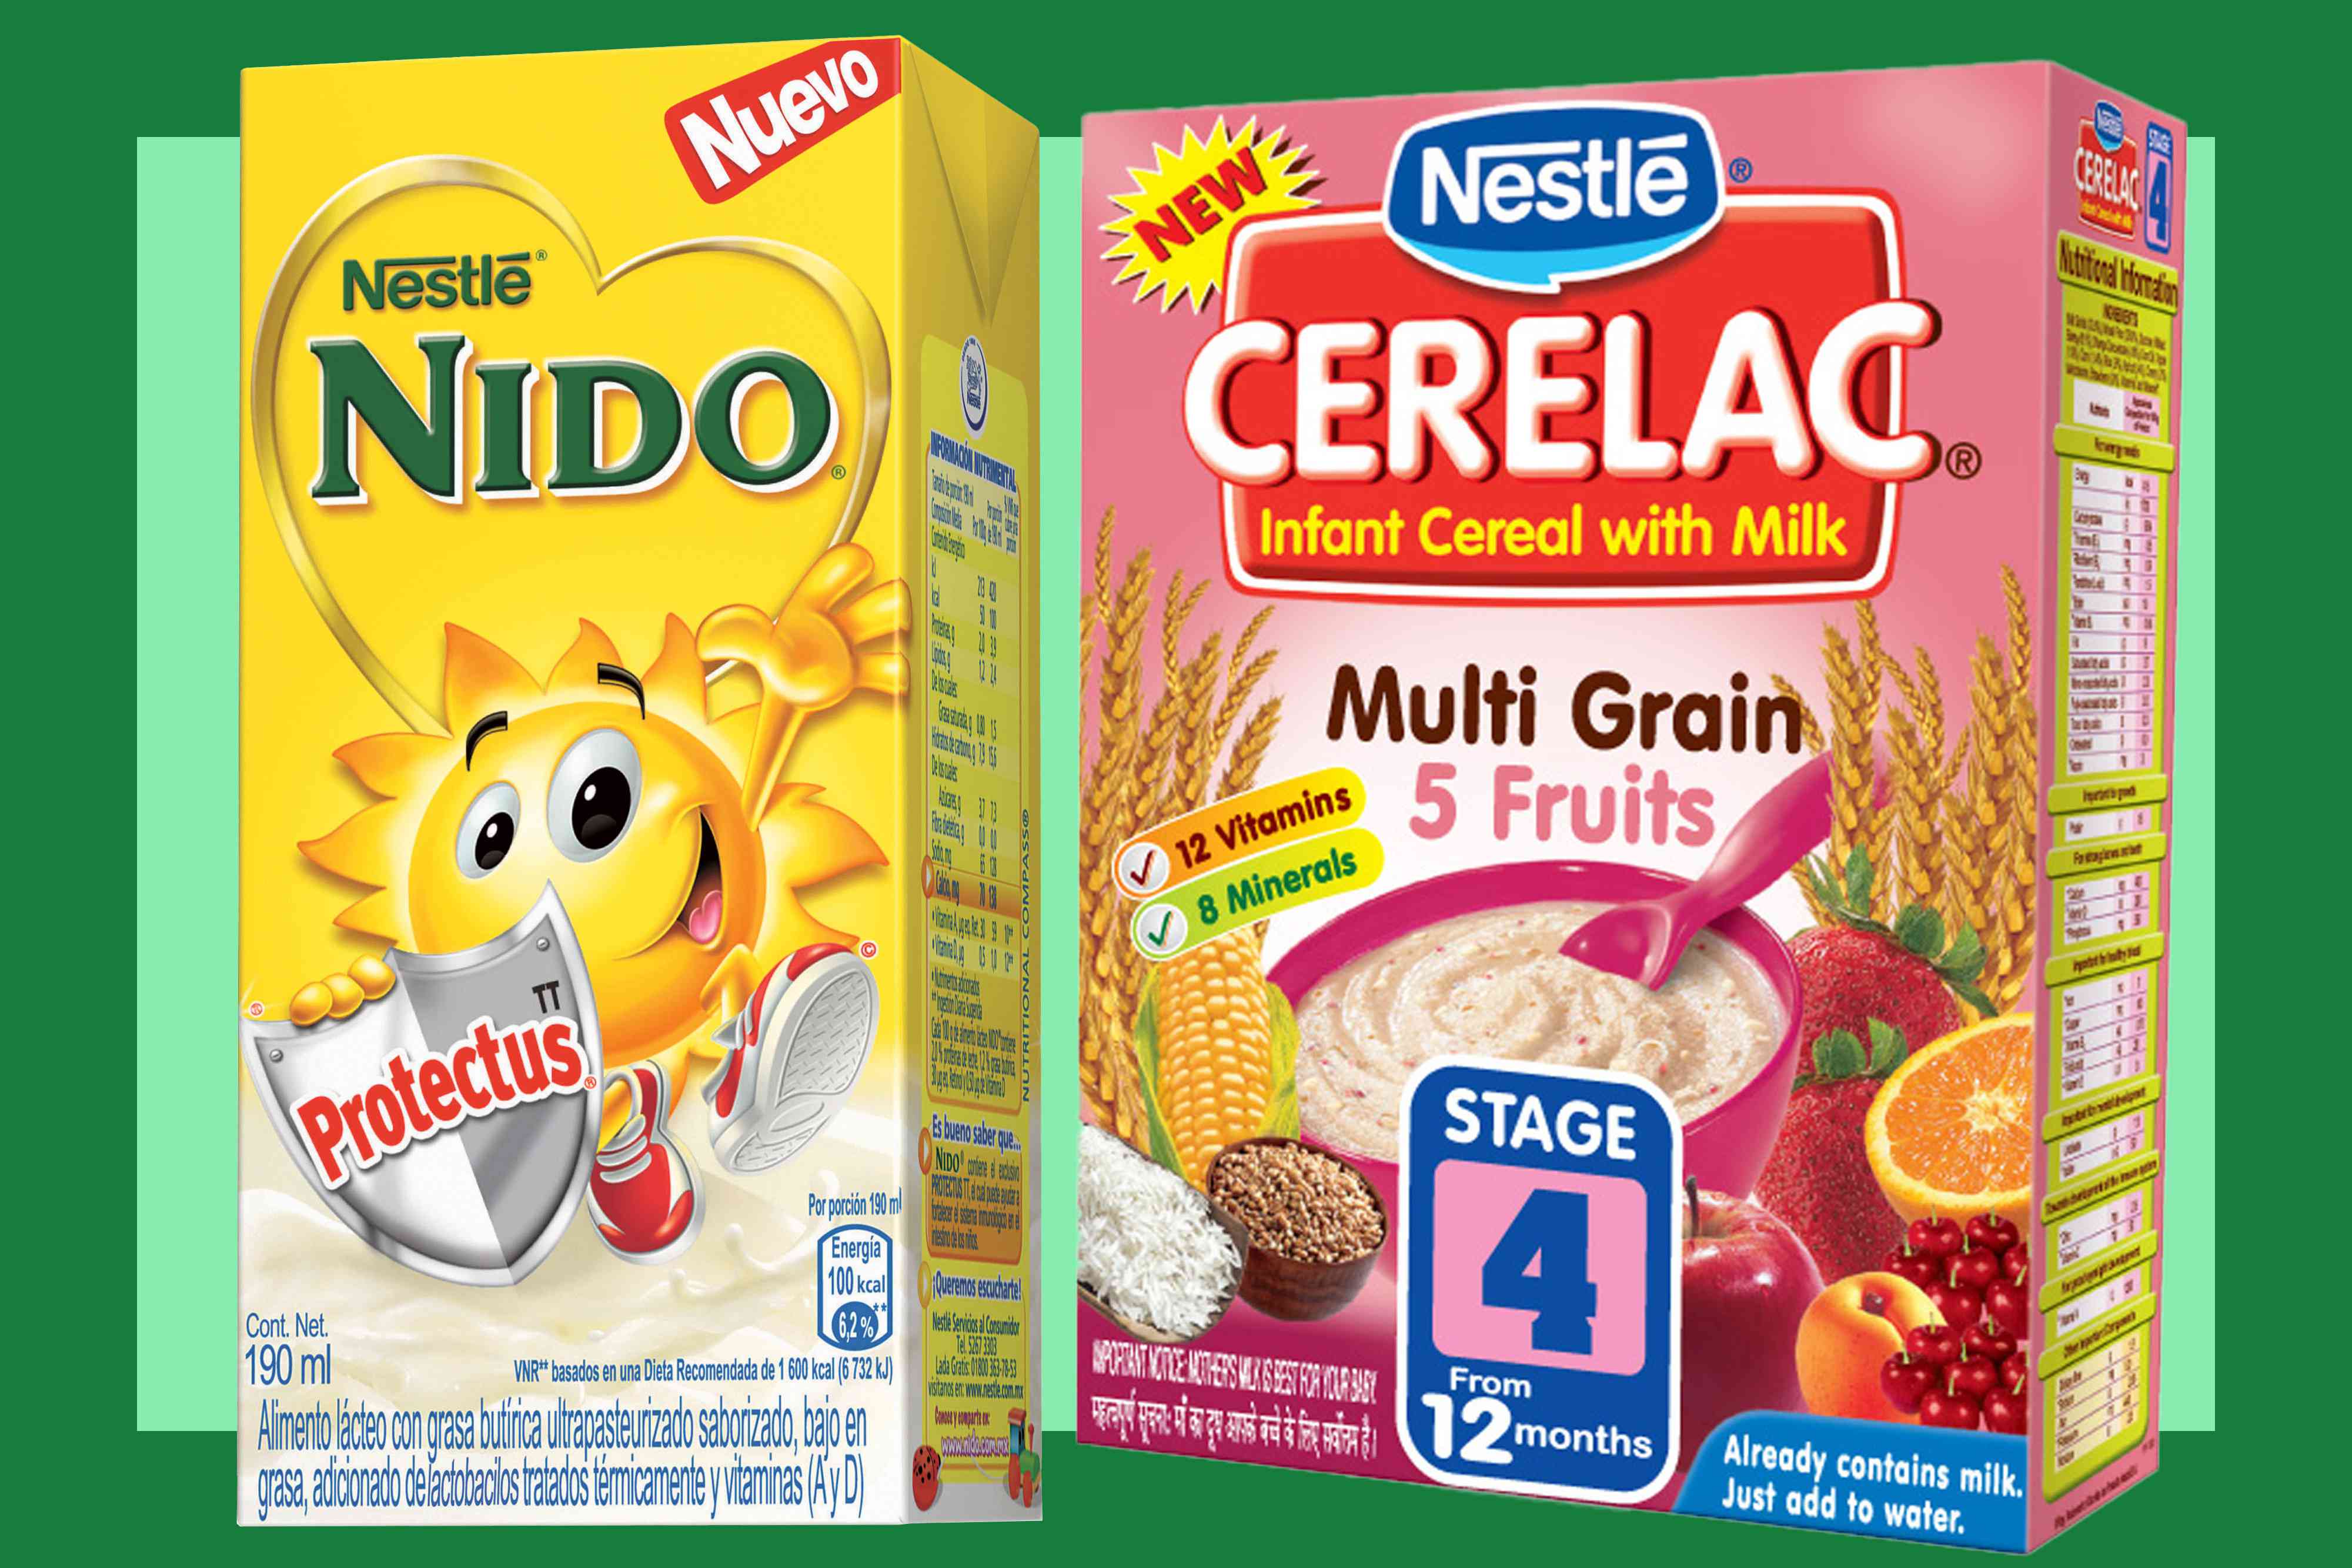 a new report claims nestle adds sugar to baby food in low-income countries